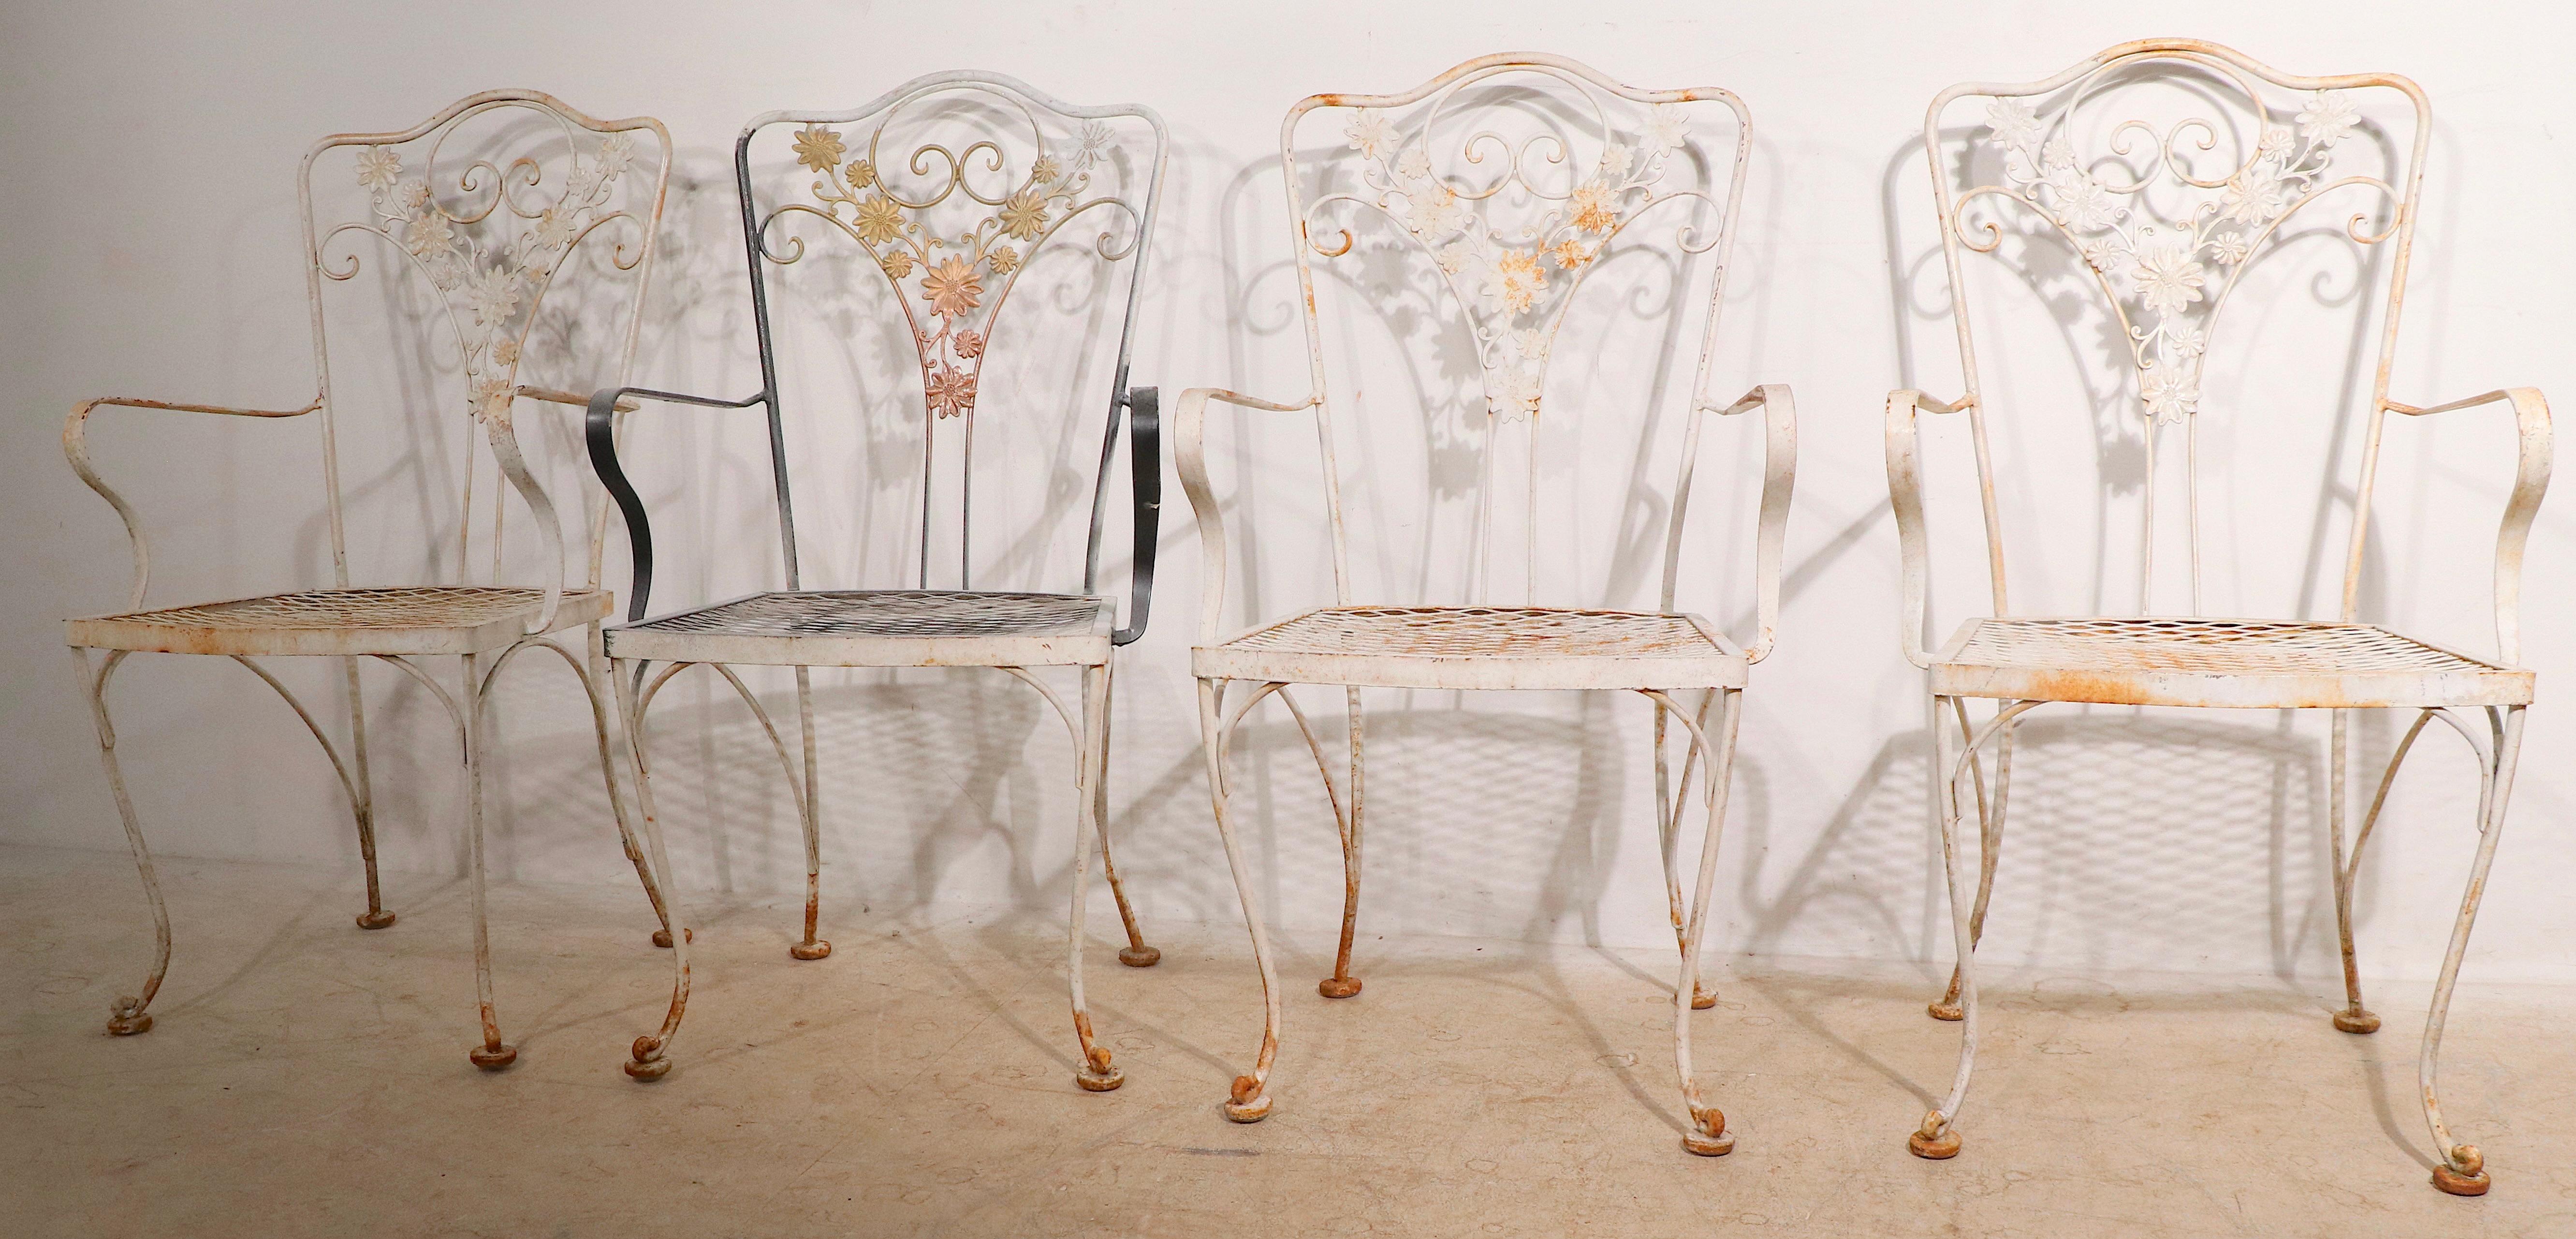 Set of four Woodard Orleans pattern dining arm chairs. The chairs are structurally sound and sturdy, the paint finish shows wear and variations throughout. Unusual to find four matching arm chairs. Usable as is or we offer custom powder coating if